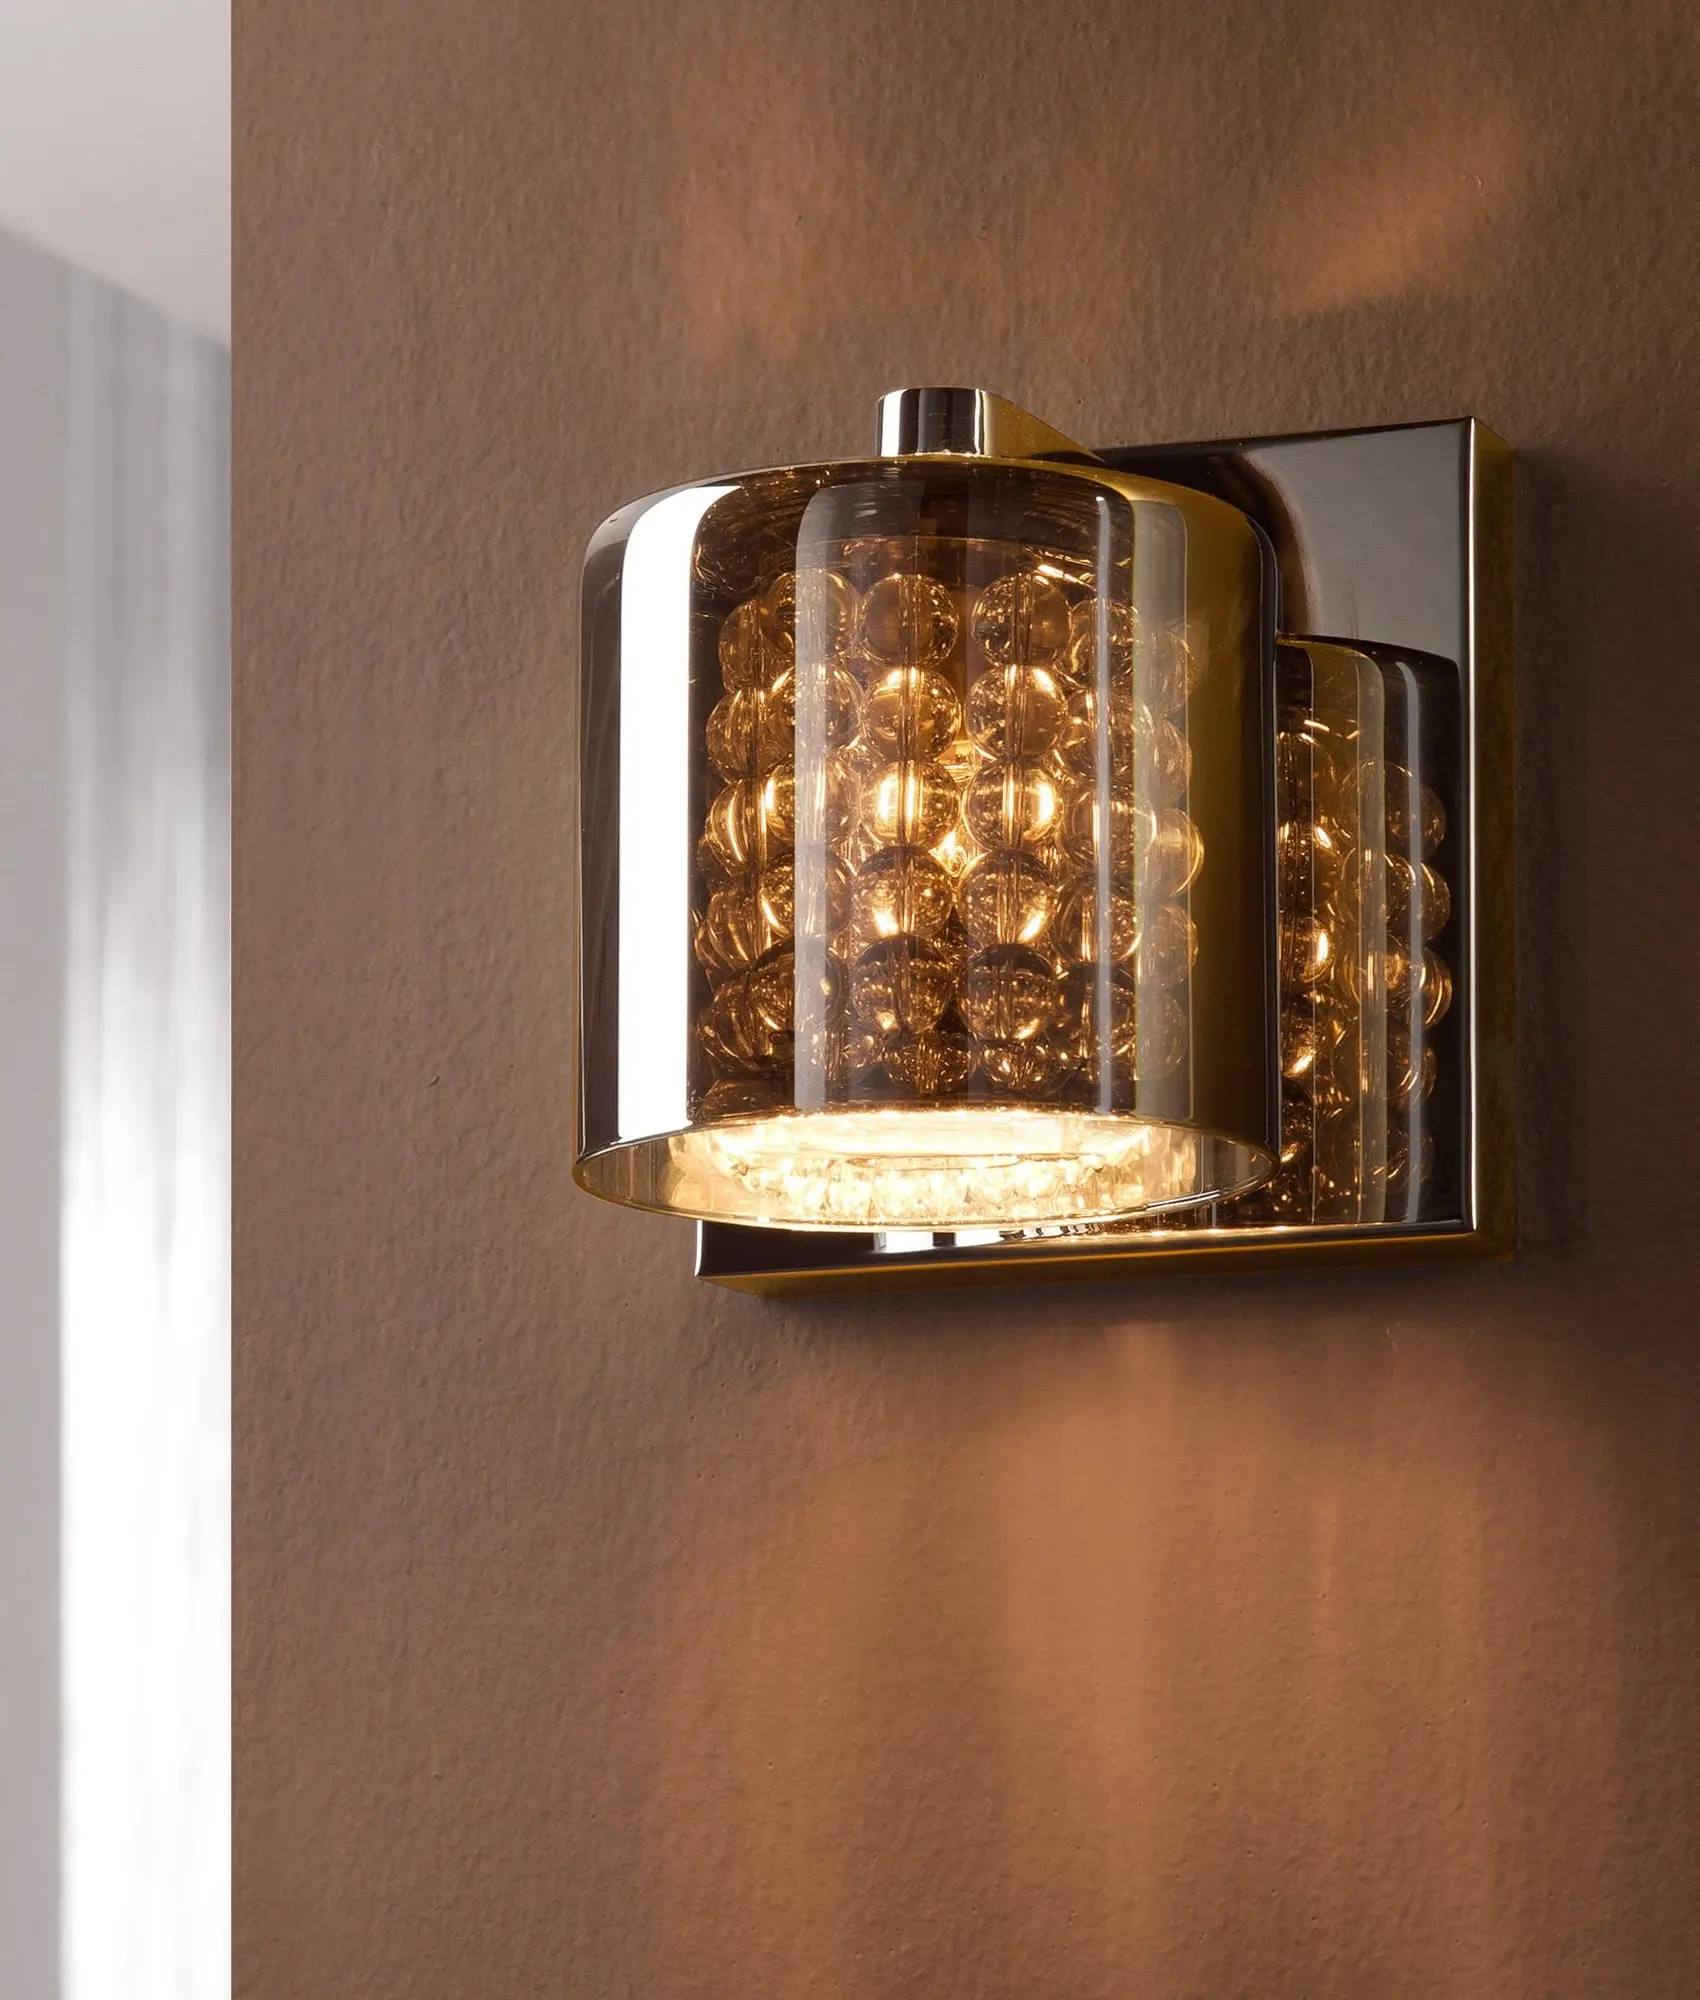 smoked glass wall lights uk - What height should bedside wall lights be UK